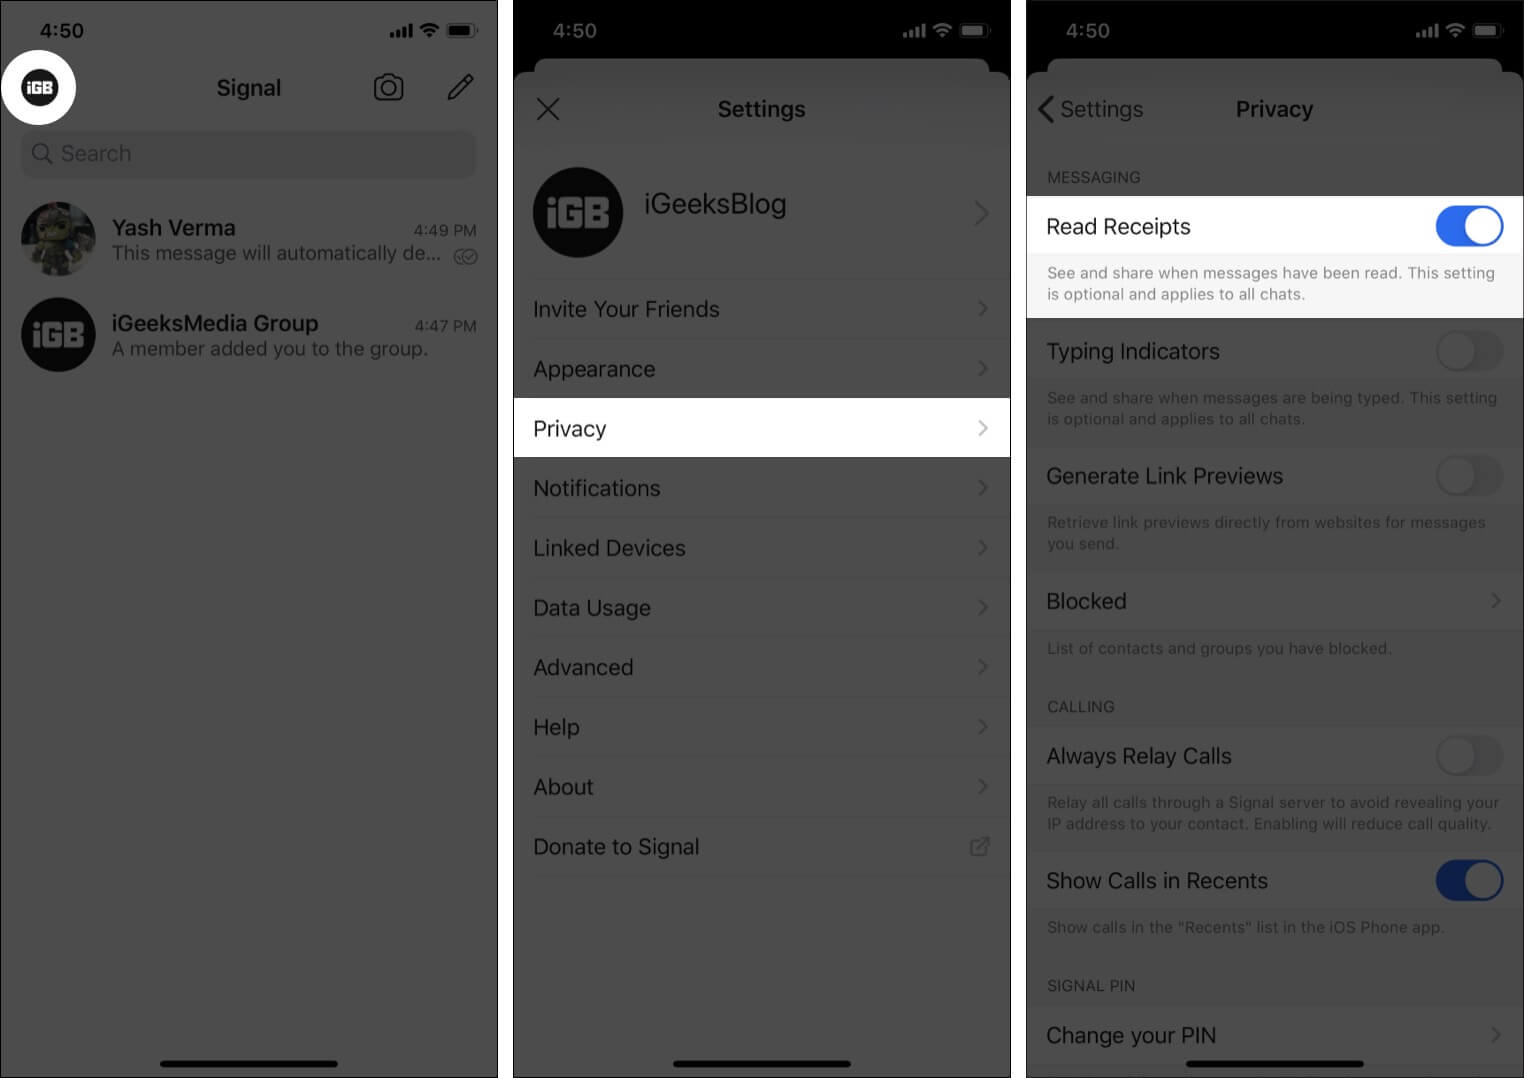 Choose to share or hide read receipts in Signal